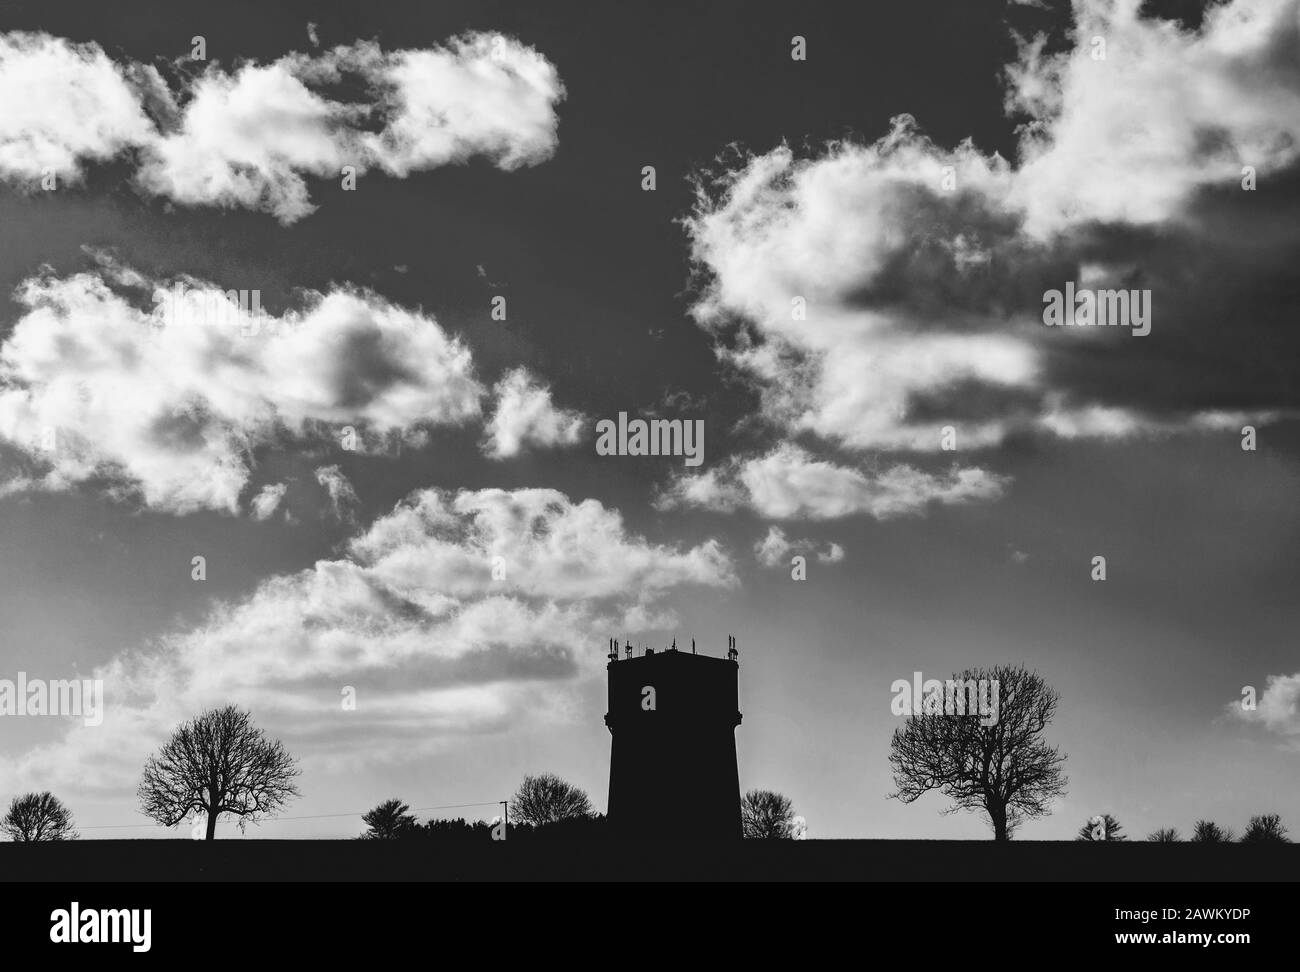 Watertower, Meppershall Bedfordshire, Black and White Landscape Stock Photo